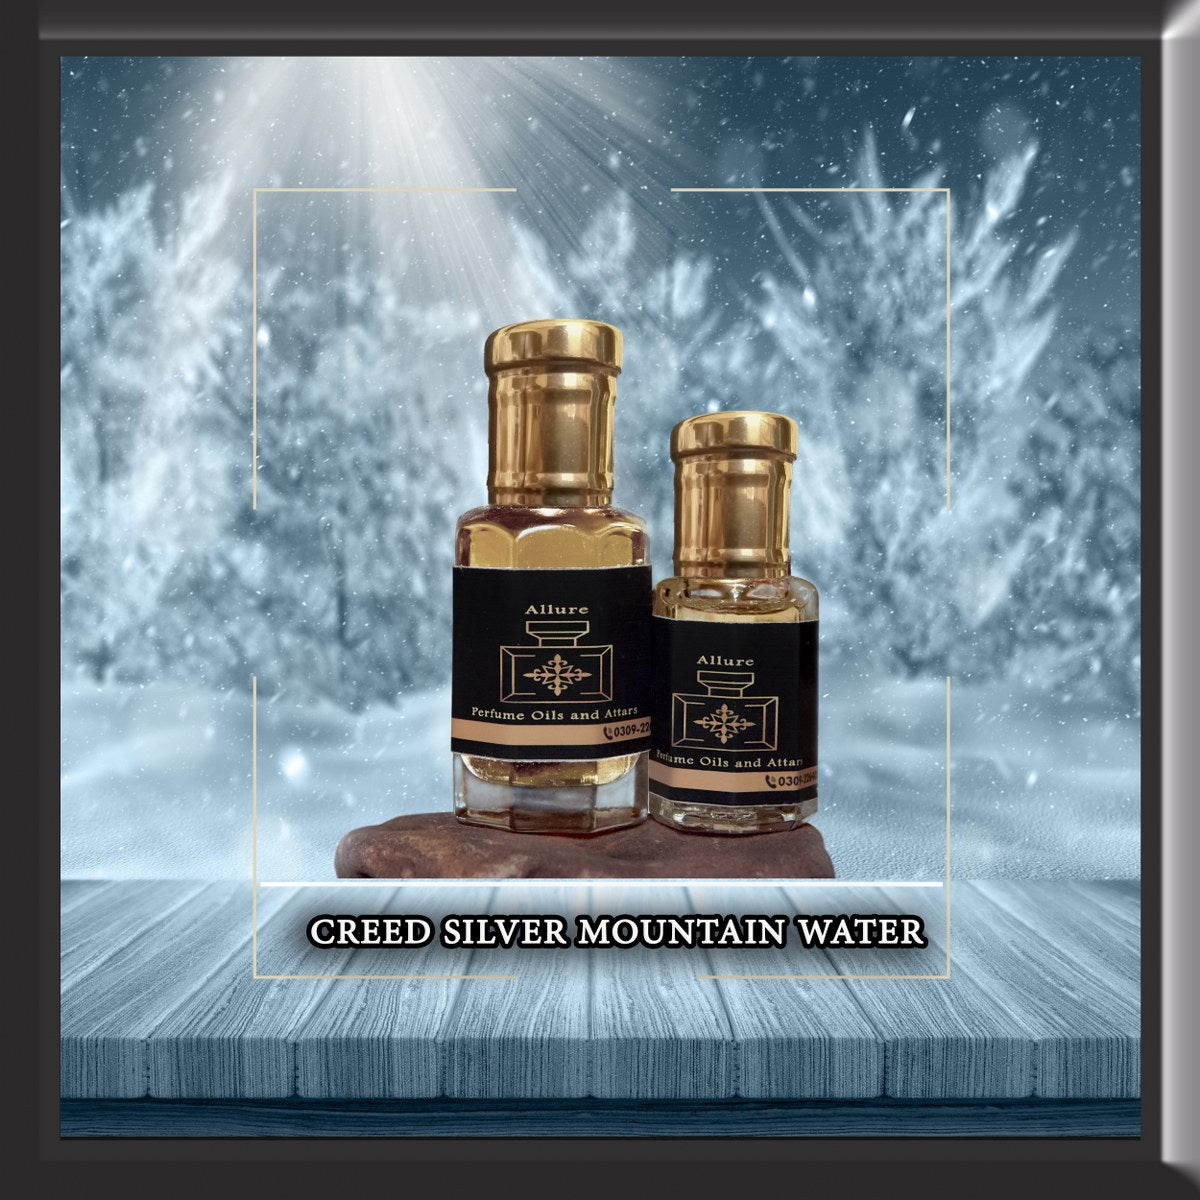 Creed Silver Mountain Water Attar in high quality (Perfume Oil)